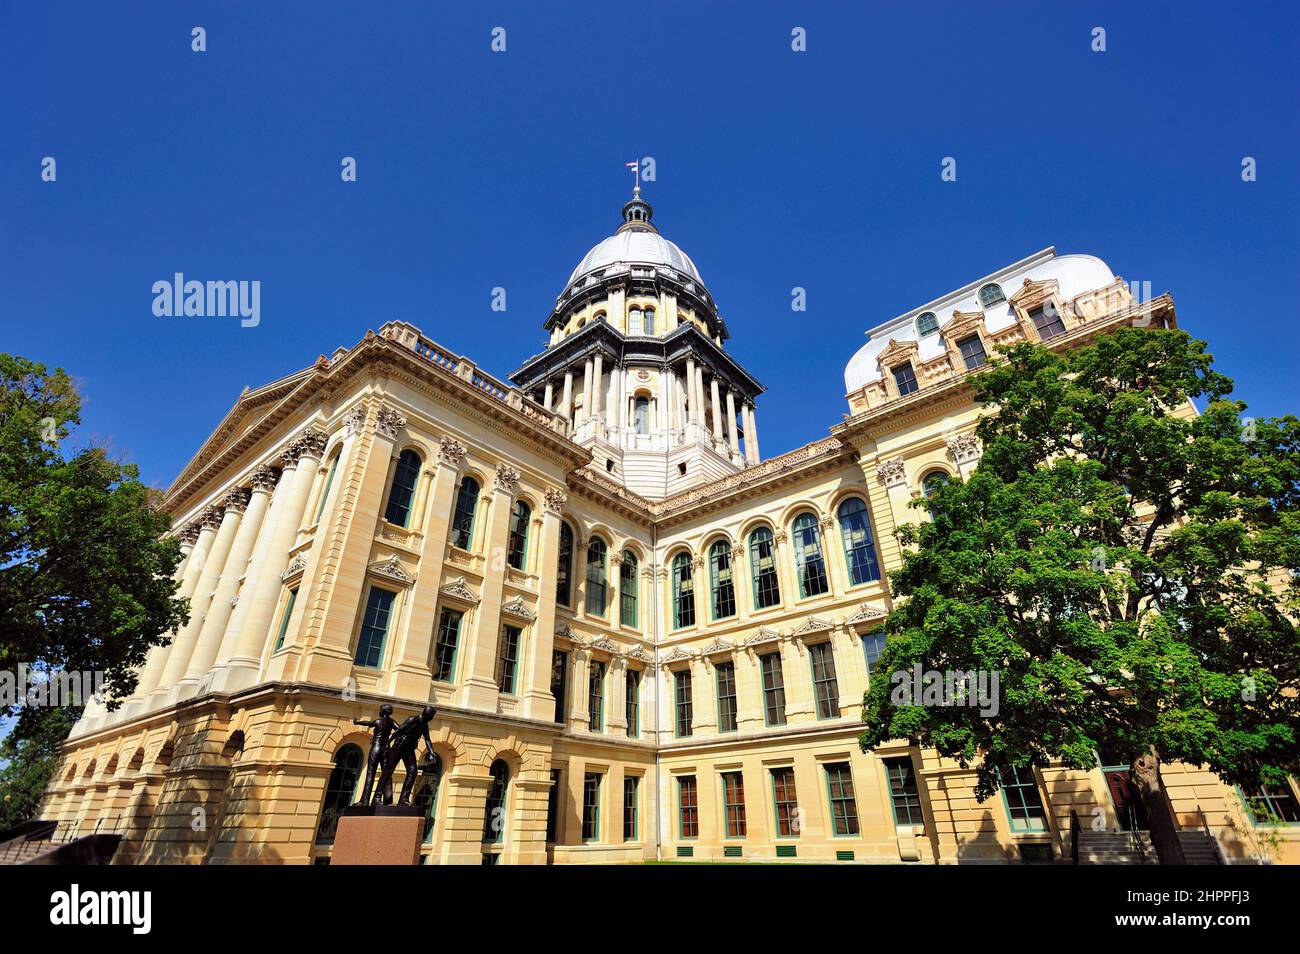 Springfield, Illinois, USA. The Illinois State Capitol Building built in the capitol is in the French Renaissance architectural style. Stock Photo